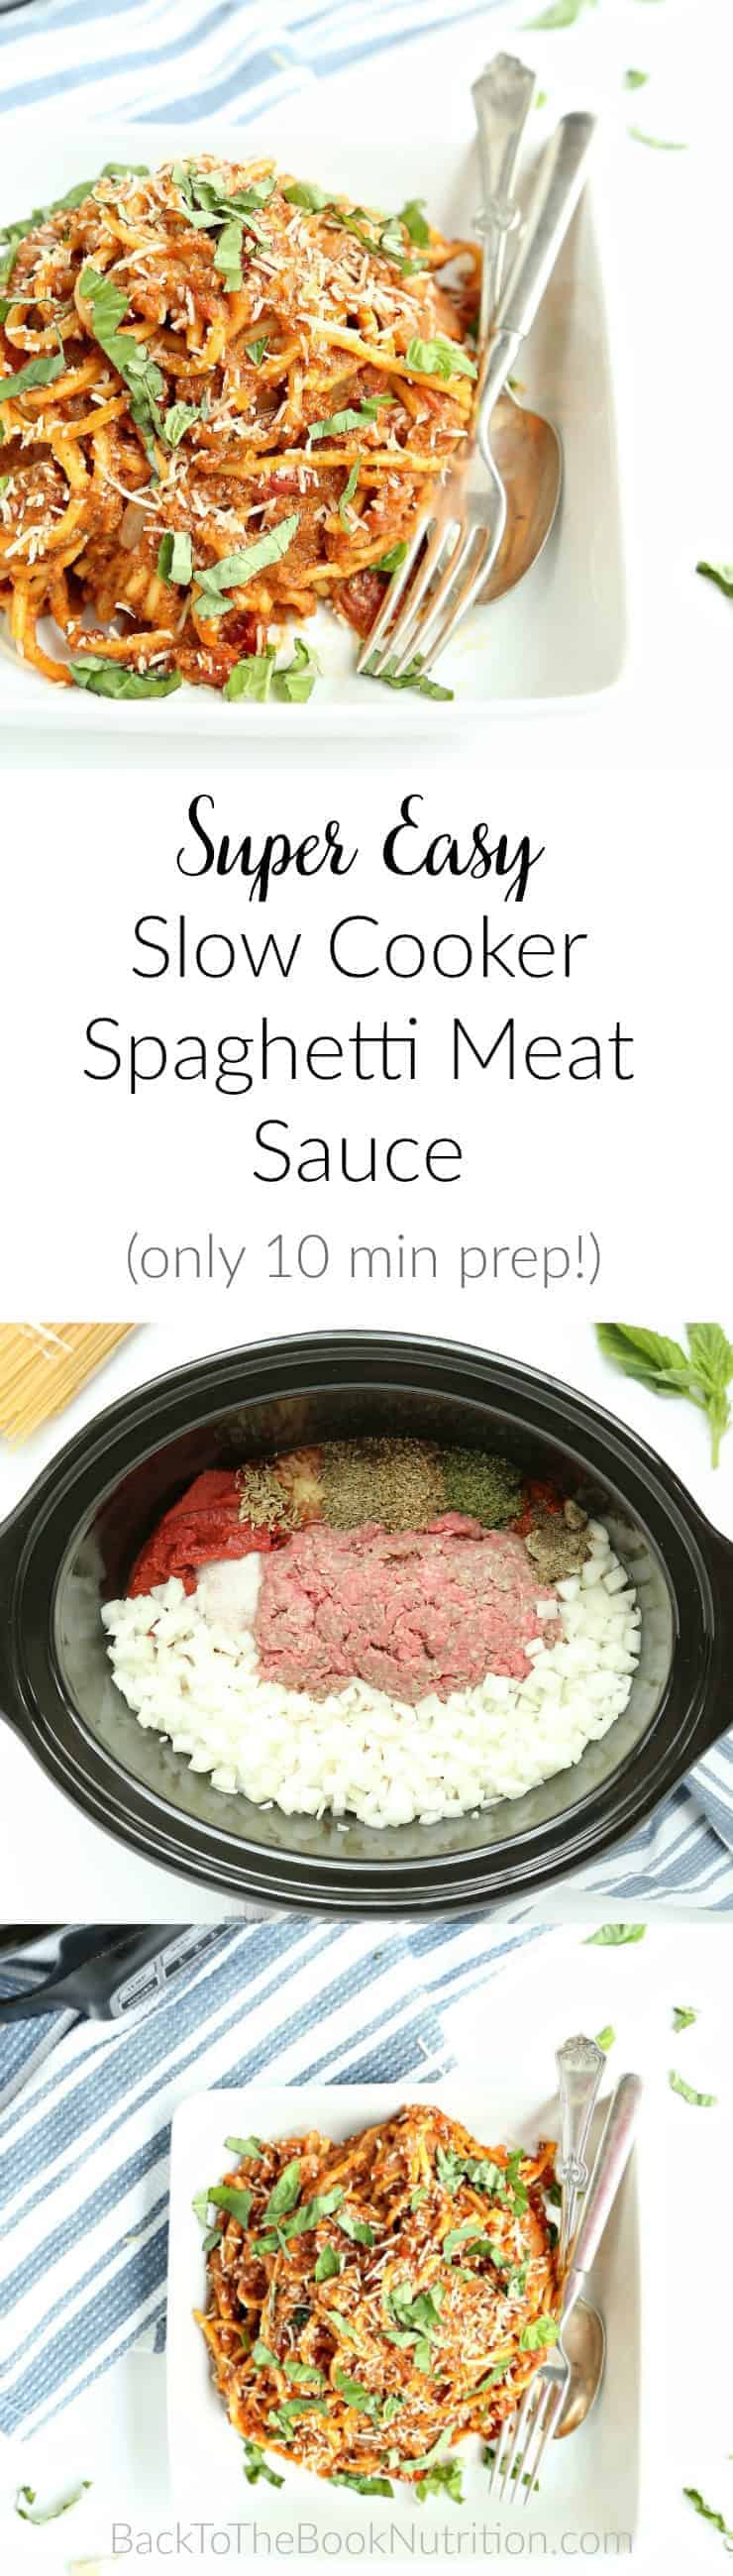 Super Easy Slow Cooker Spaghetti Meat Sauce - simple, real food ingredients and only 10 minutes of hands on prep time! | Back To The Book Nutrition